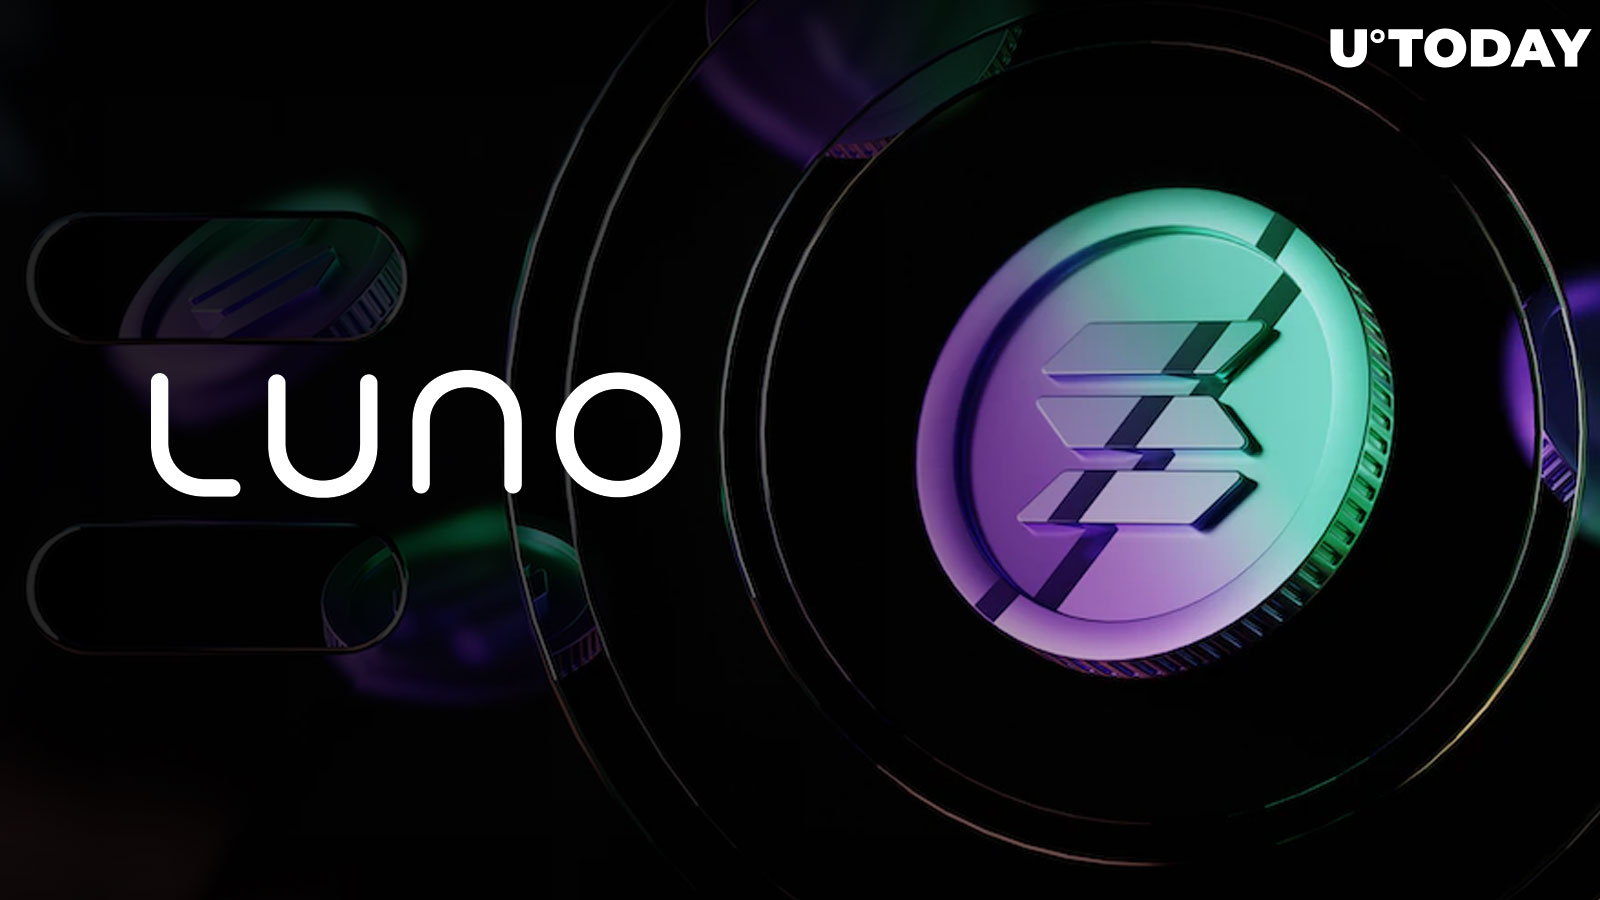 After Cardano (ADA), DCG Subsidiary Luno Adds Support for Solana (SOL)